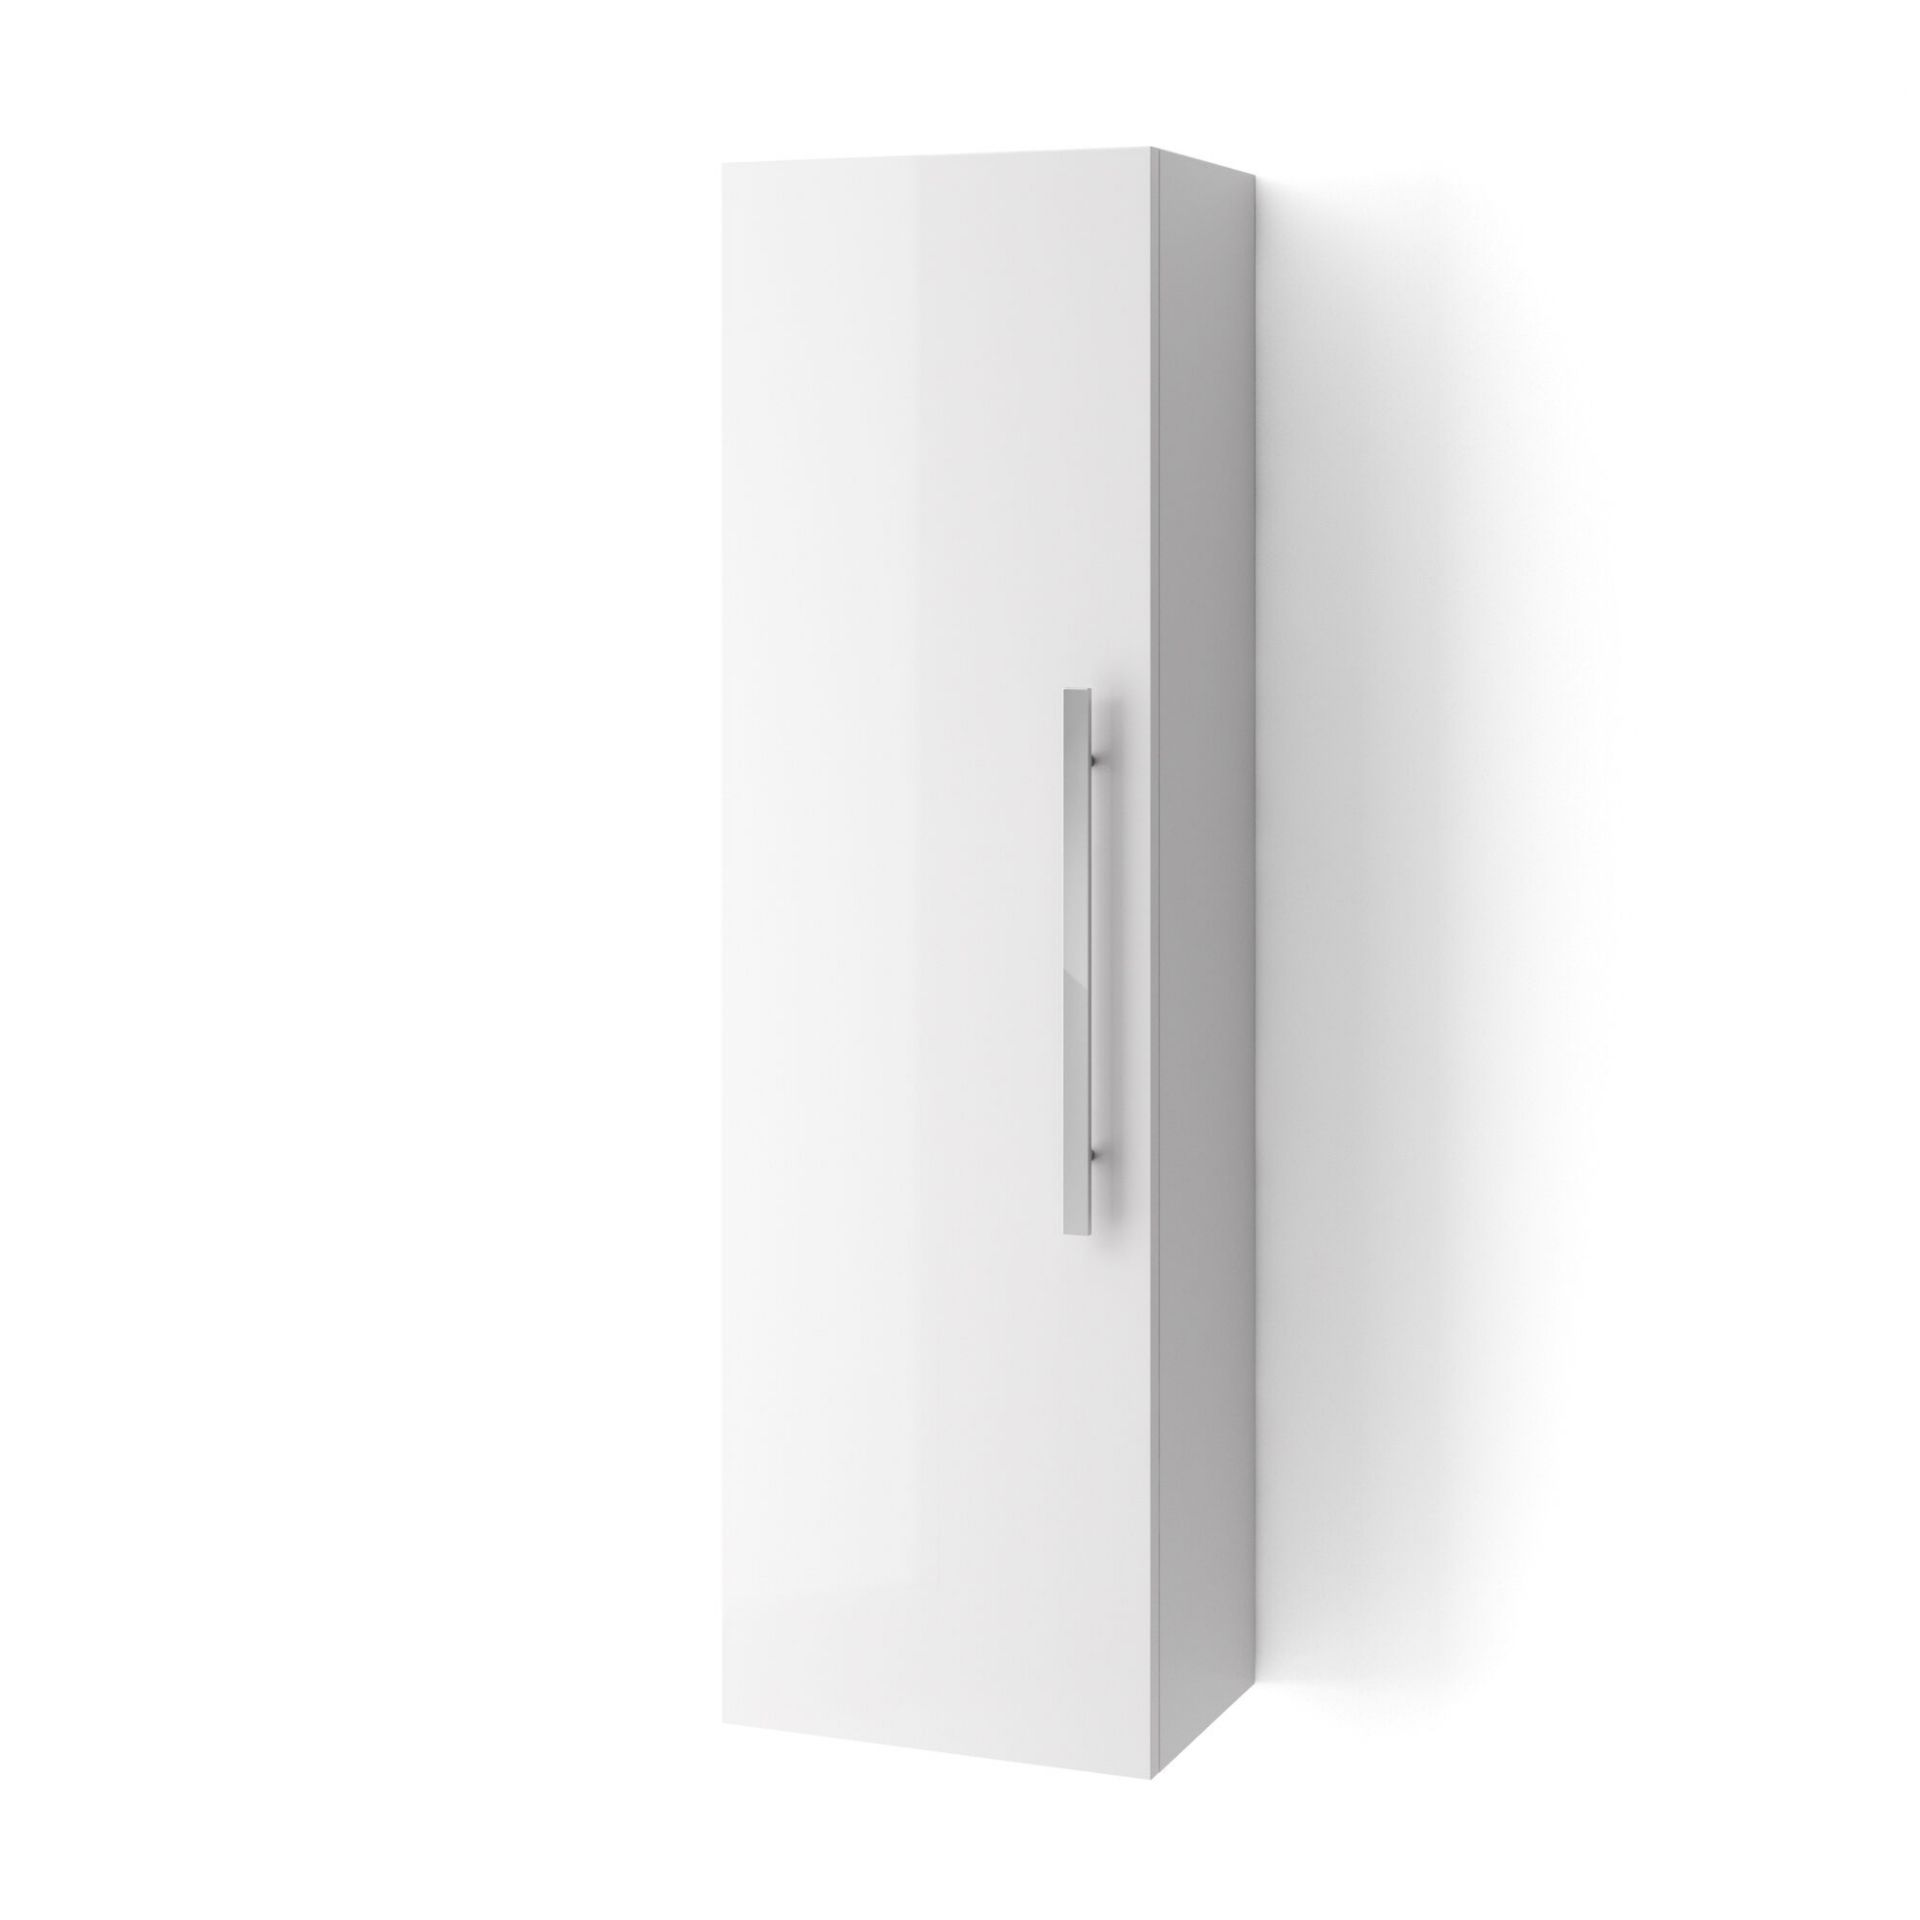 (XL105) Keramag Silk White High Gloss Side Cabinet. RRP £469.99. Engineered with everyday use ... - Image 2 of 4